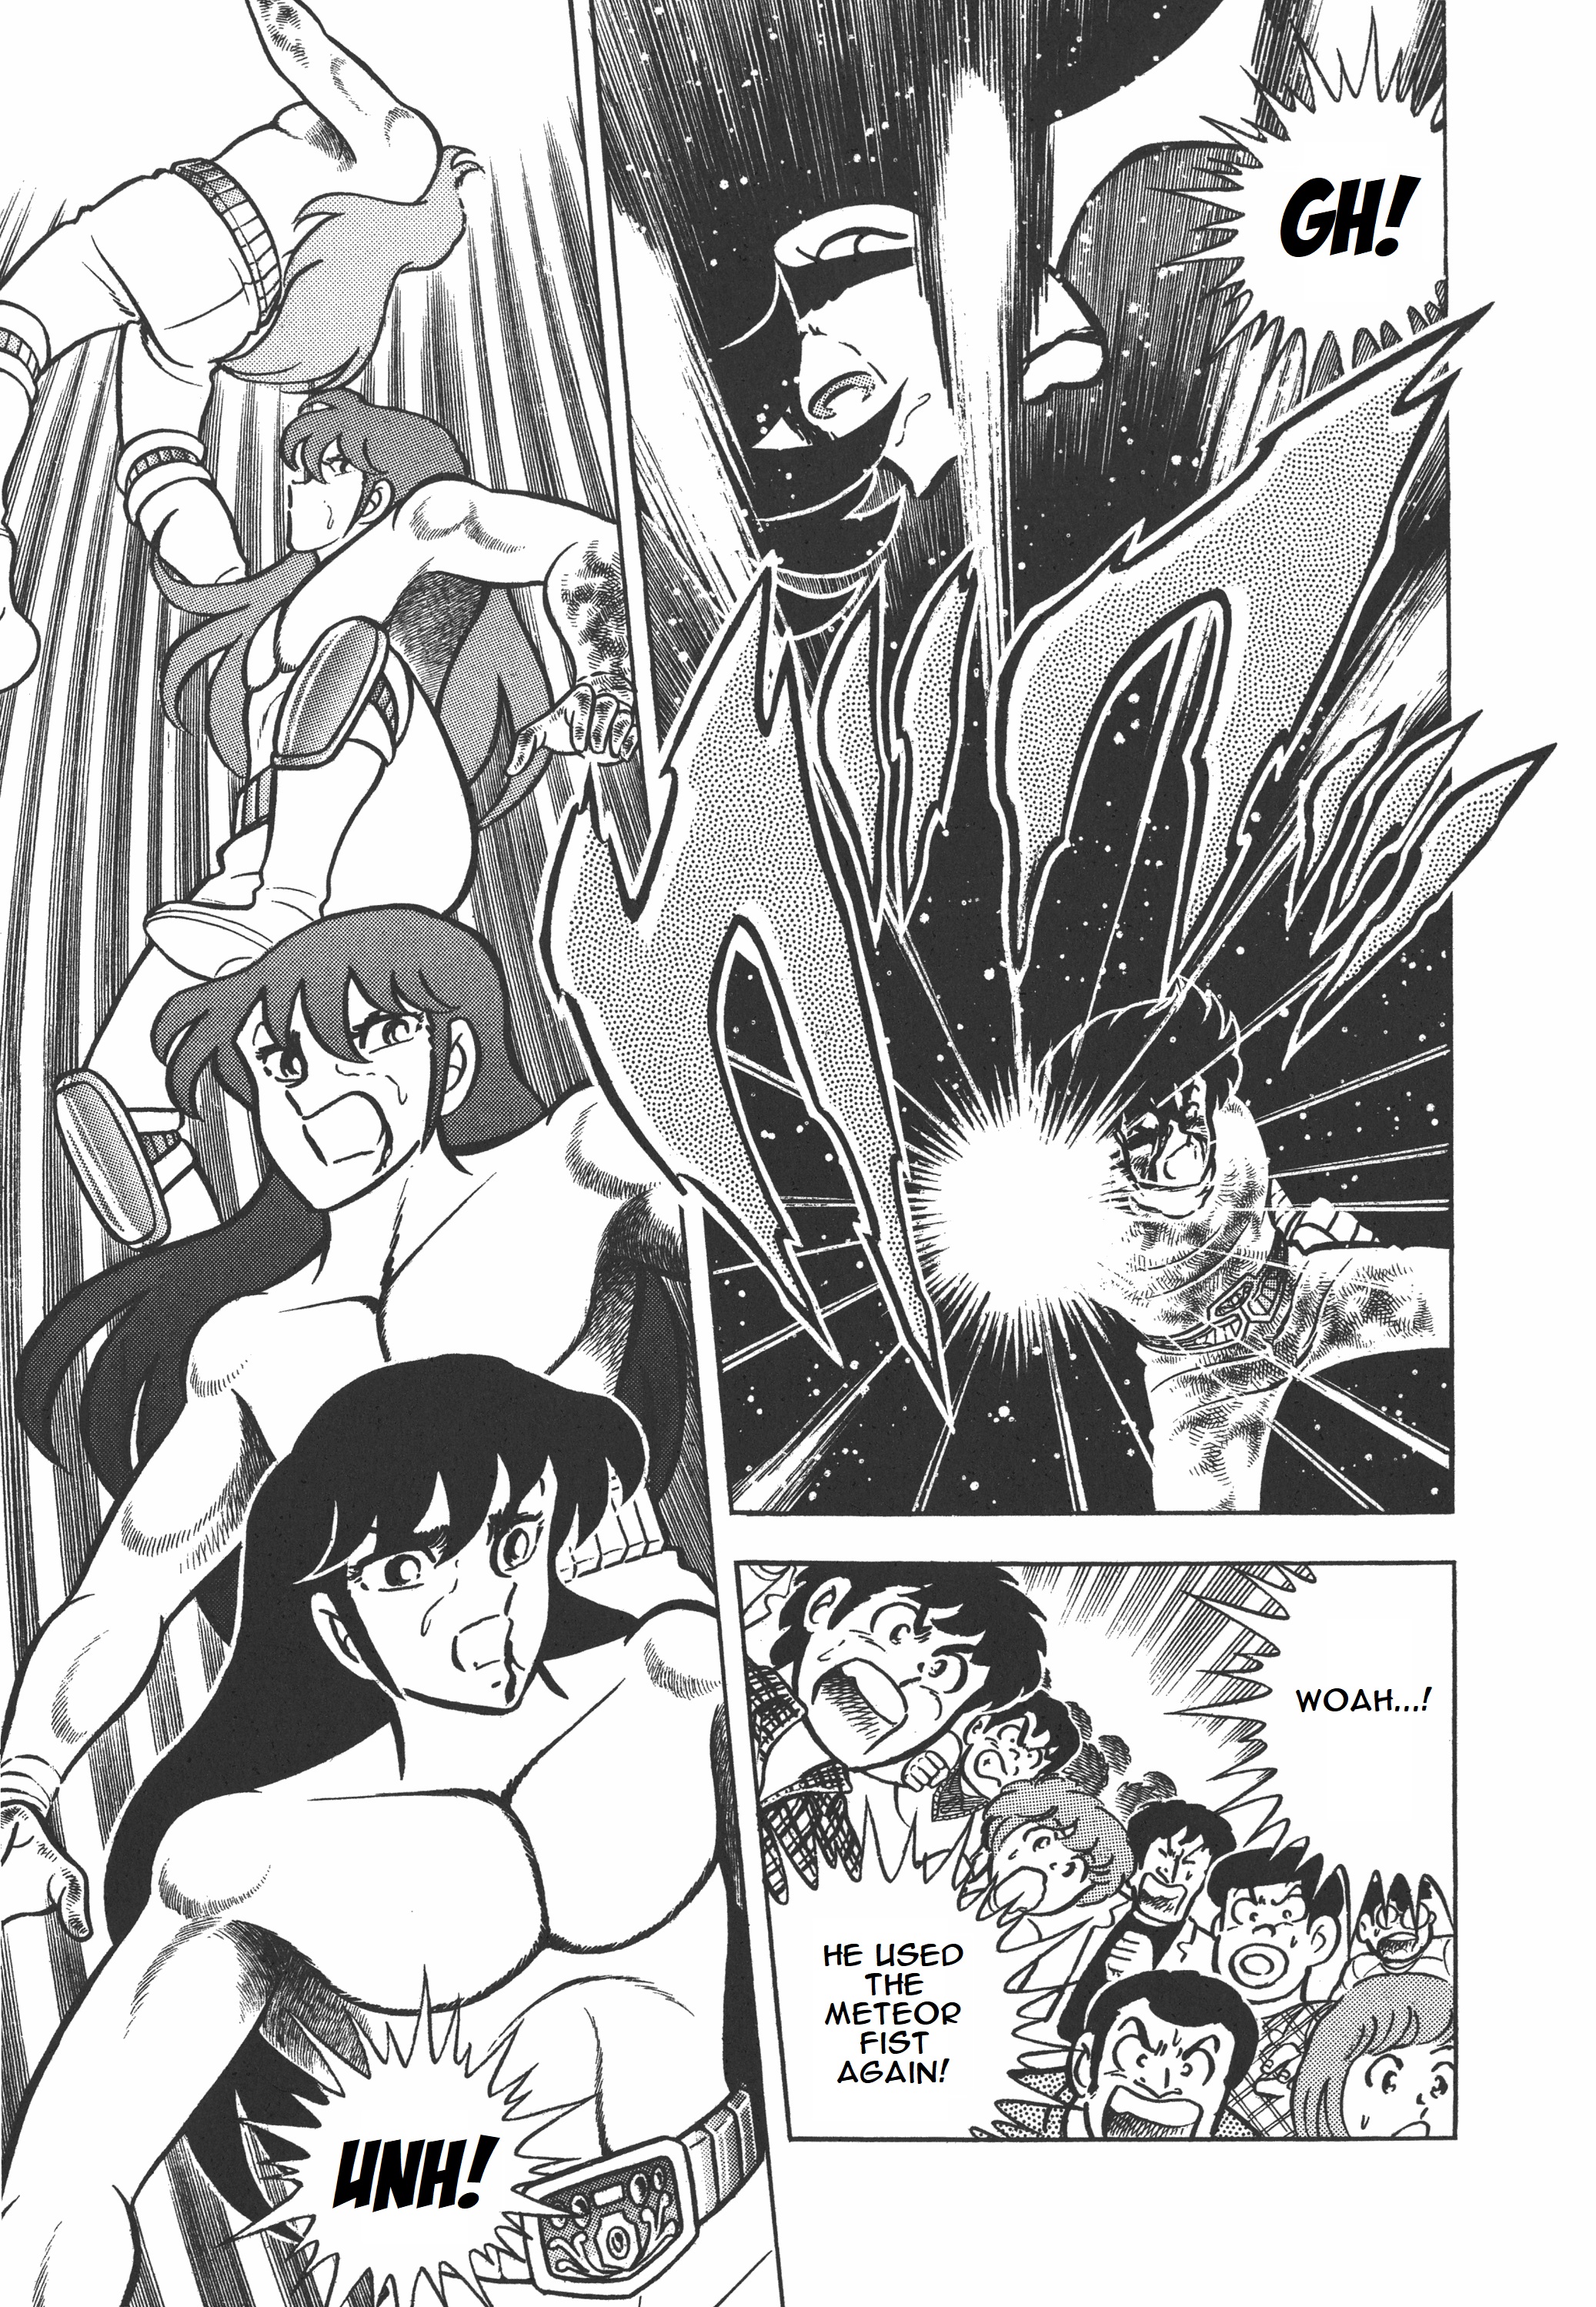 Saint Seiya (Kanzenban Edition) Vol.2 Chapter 7.2: Fight To The Death! Pegasus Vs. Dragon (Part Two) - Picture 3